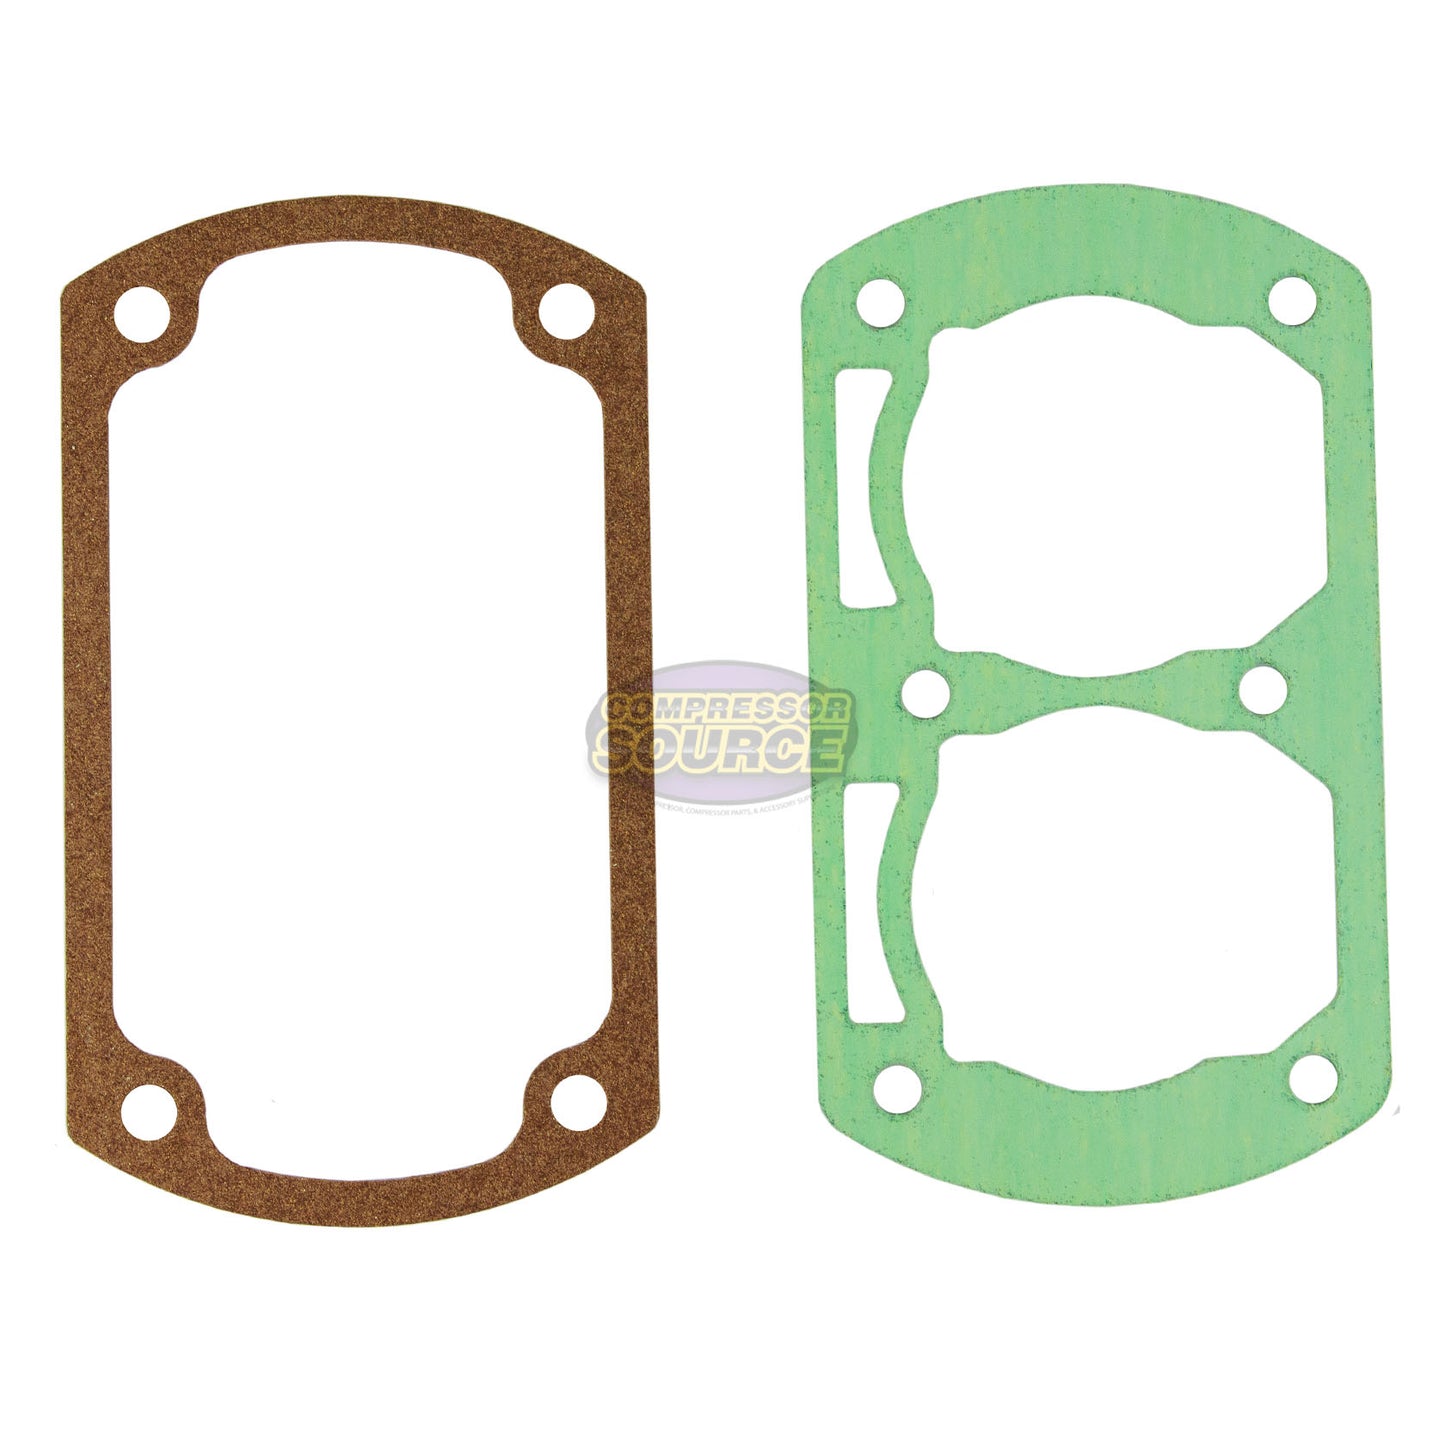 Aftermarket Replacement Gasket Rebuild Kit For Ingersoll Rand SS3 SS3L Air Compressor Pump